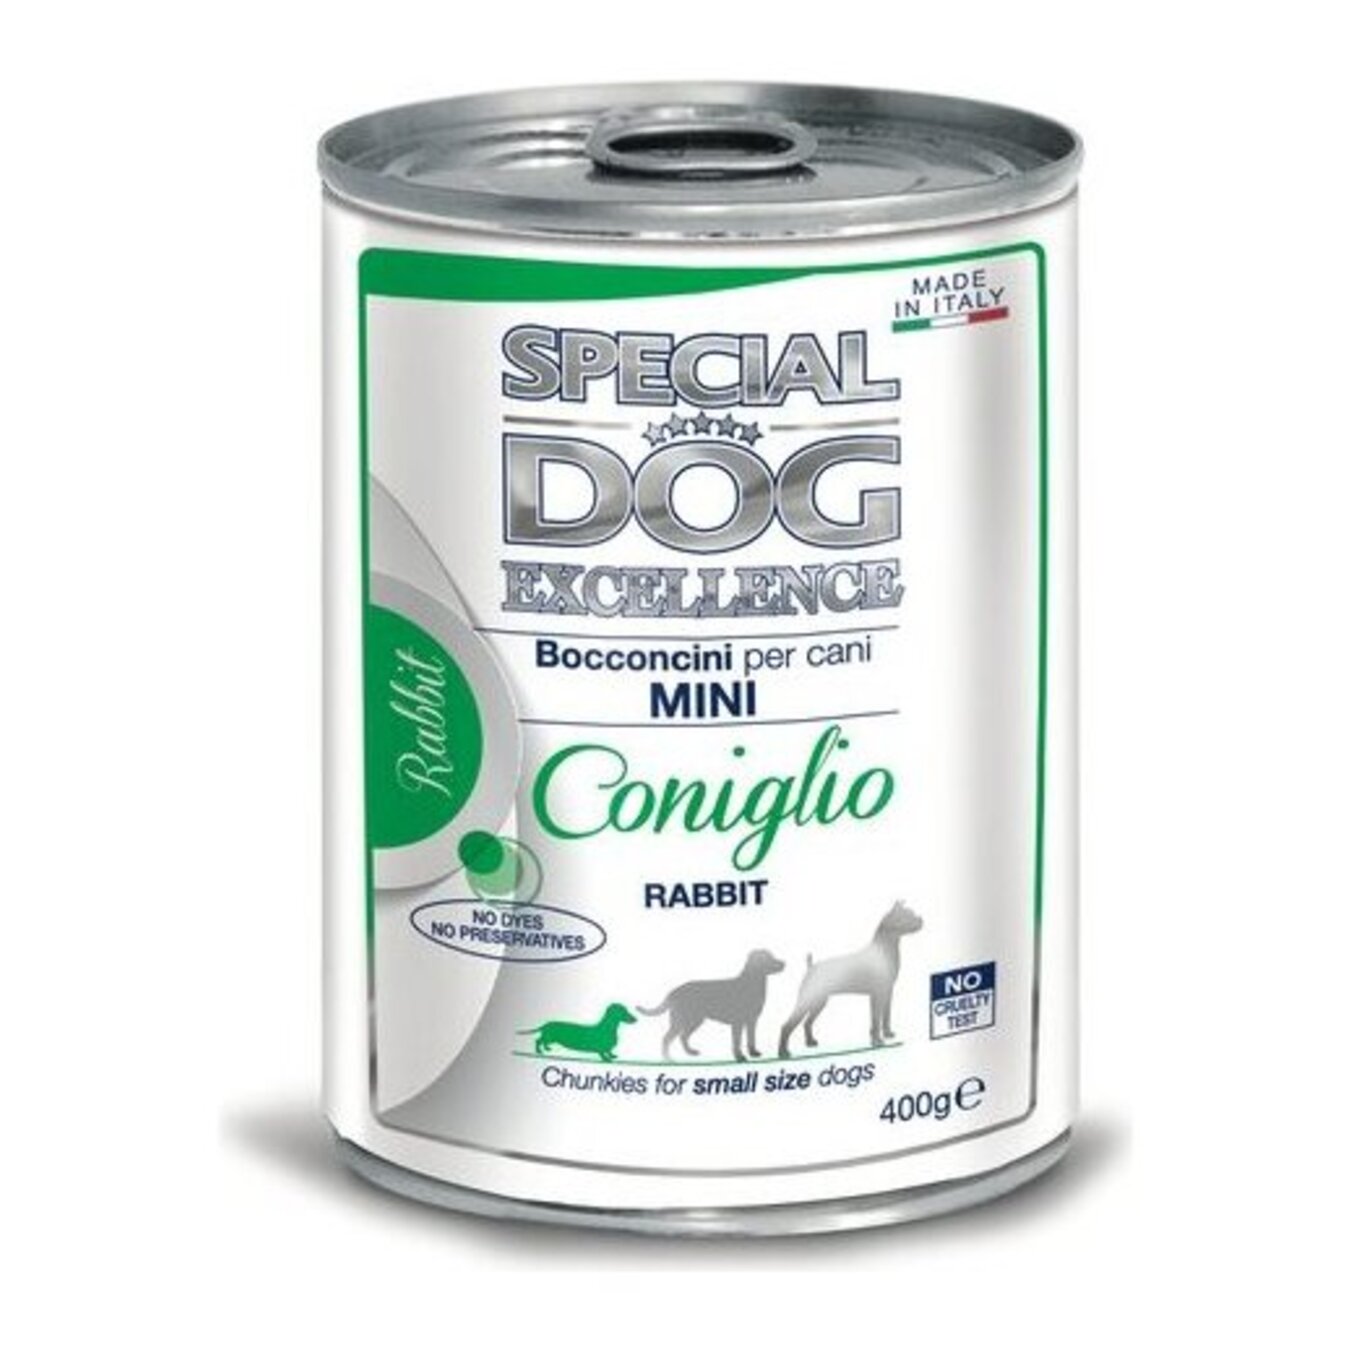 Food for small dogs Monge SDE rabbit canned 400g